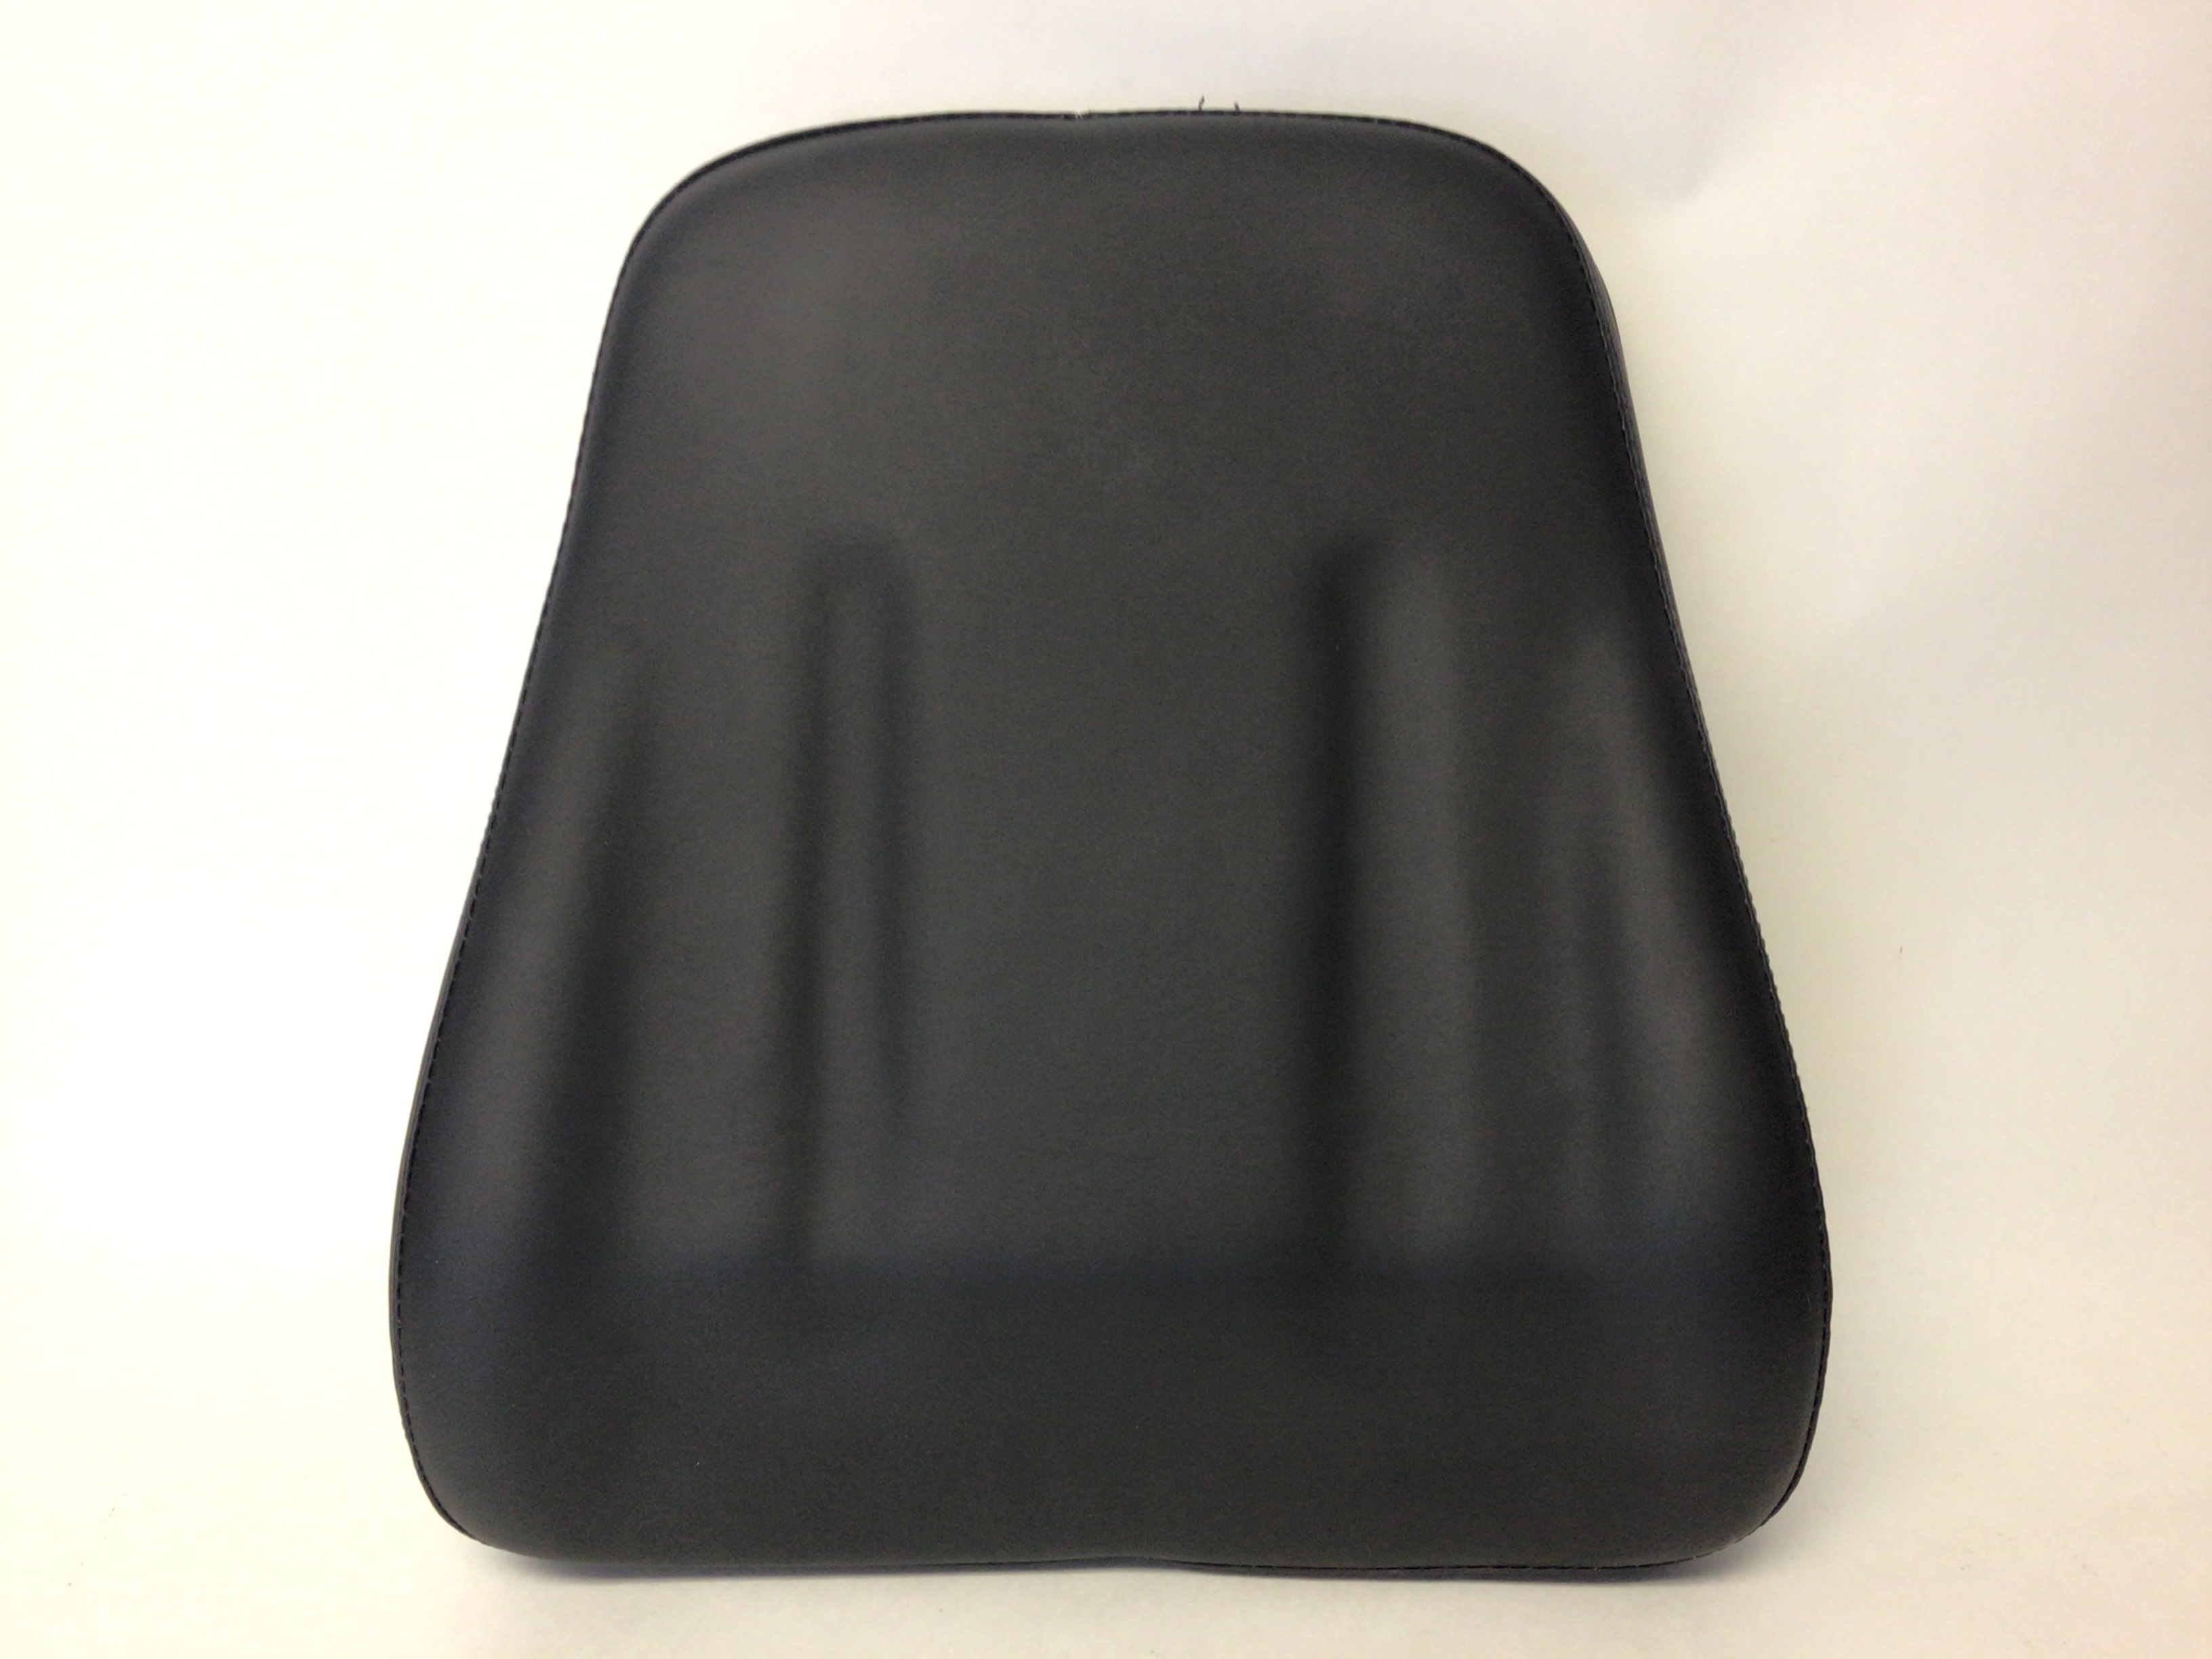 PAD SEAT BACK D/C, NO REPL: Part will show as orderable until stock is depleted.